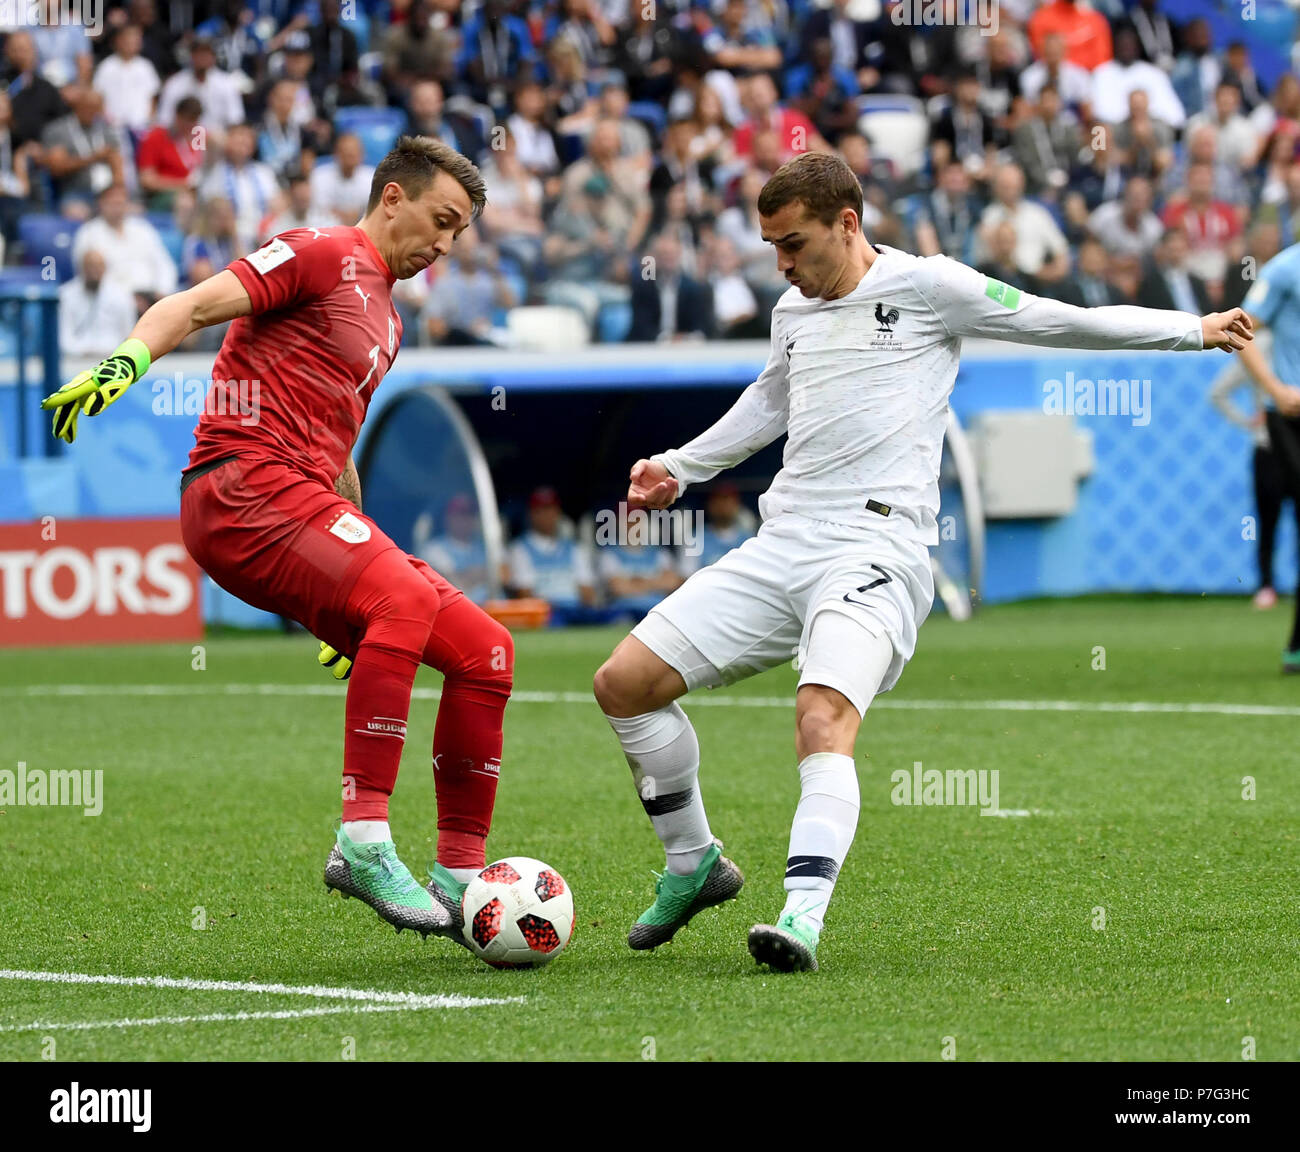 Nizhny Novgorod, Russia. 6th July, 2018. Goalkeeper Fernando Muslera (L) of Uruguay vies with Antoine Griezmann of France during the 2018 FIFA World Cup quarter-final match between Uruguay and France in Nizhny Novgorod, Russia, July 6, 2018. Credit: Chen Cheng/Xinhua/Alamy Live News Stock Photo